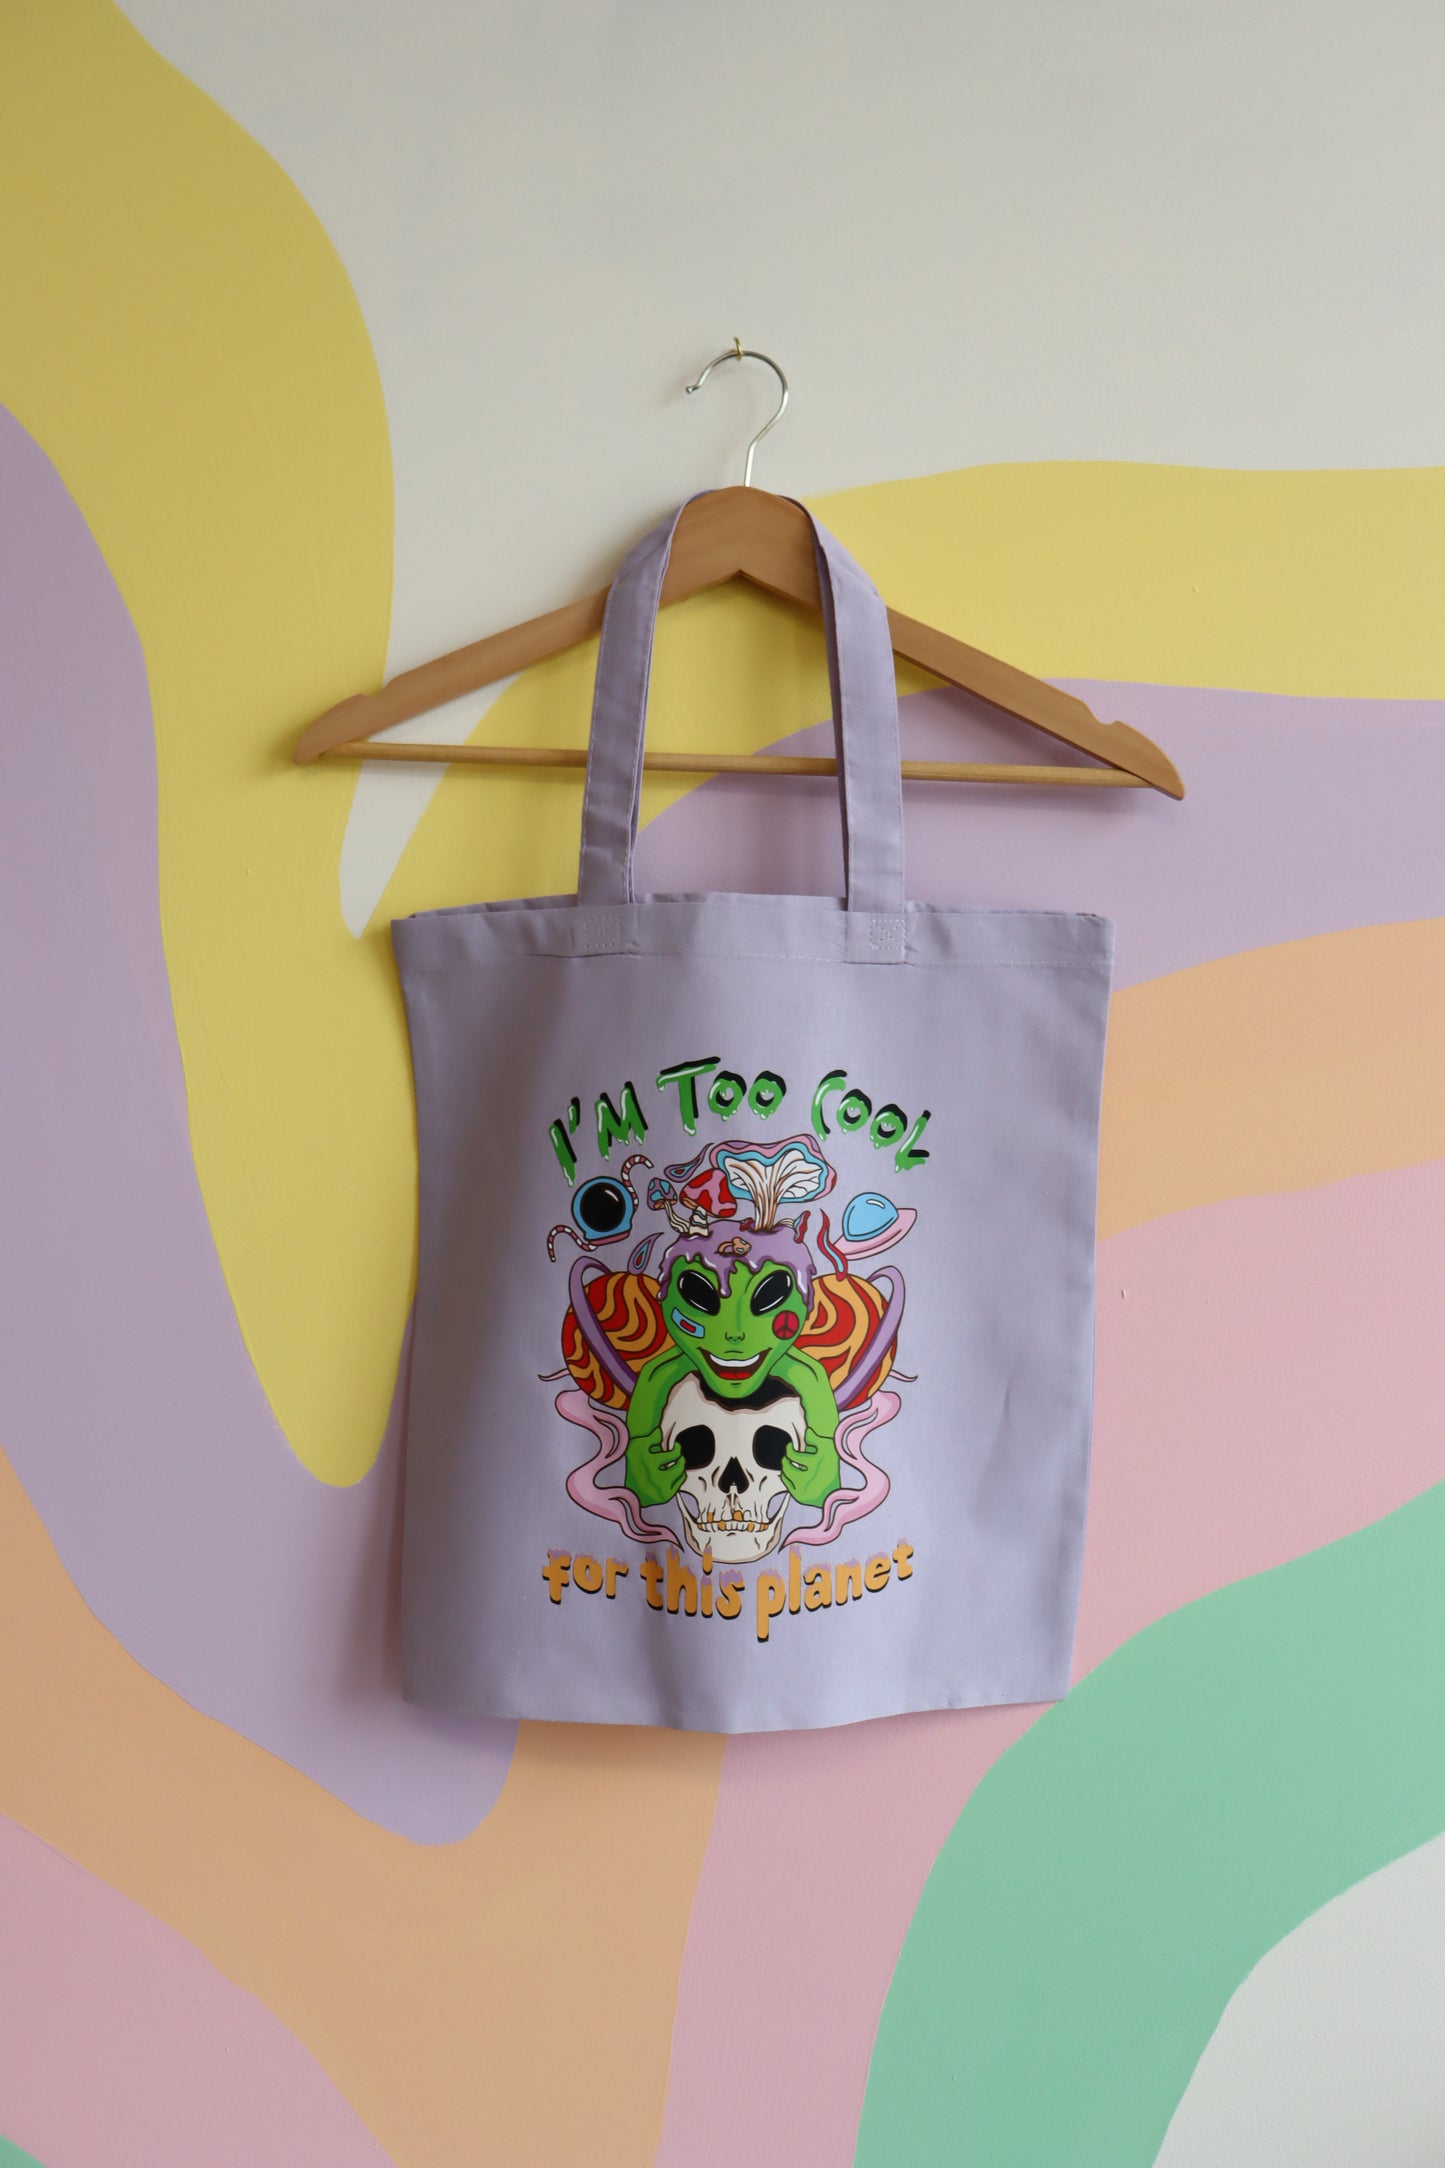 Colorful Graphic Print Tote bags